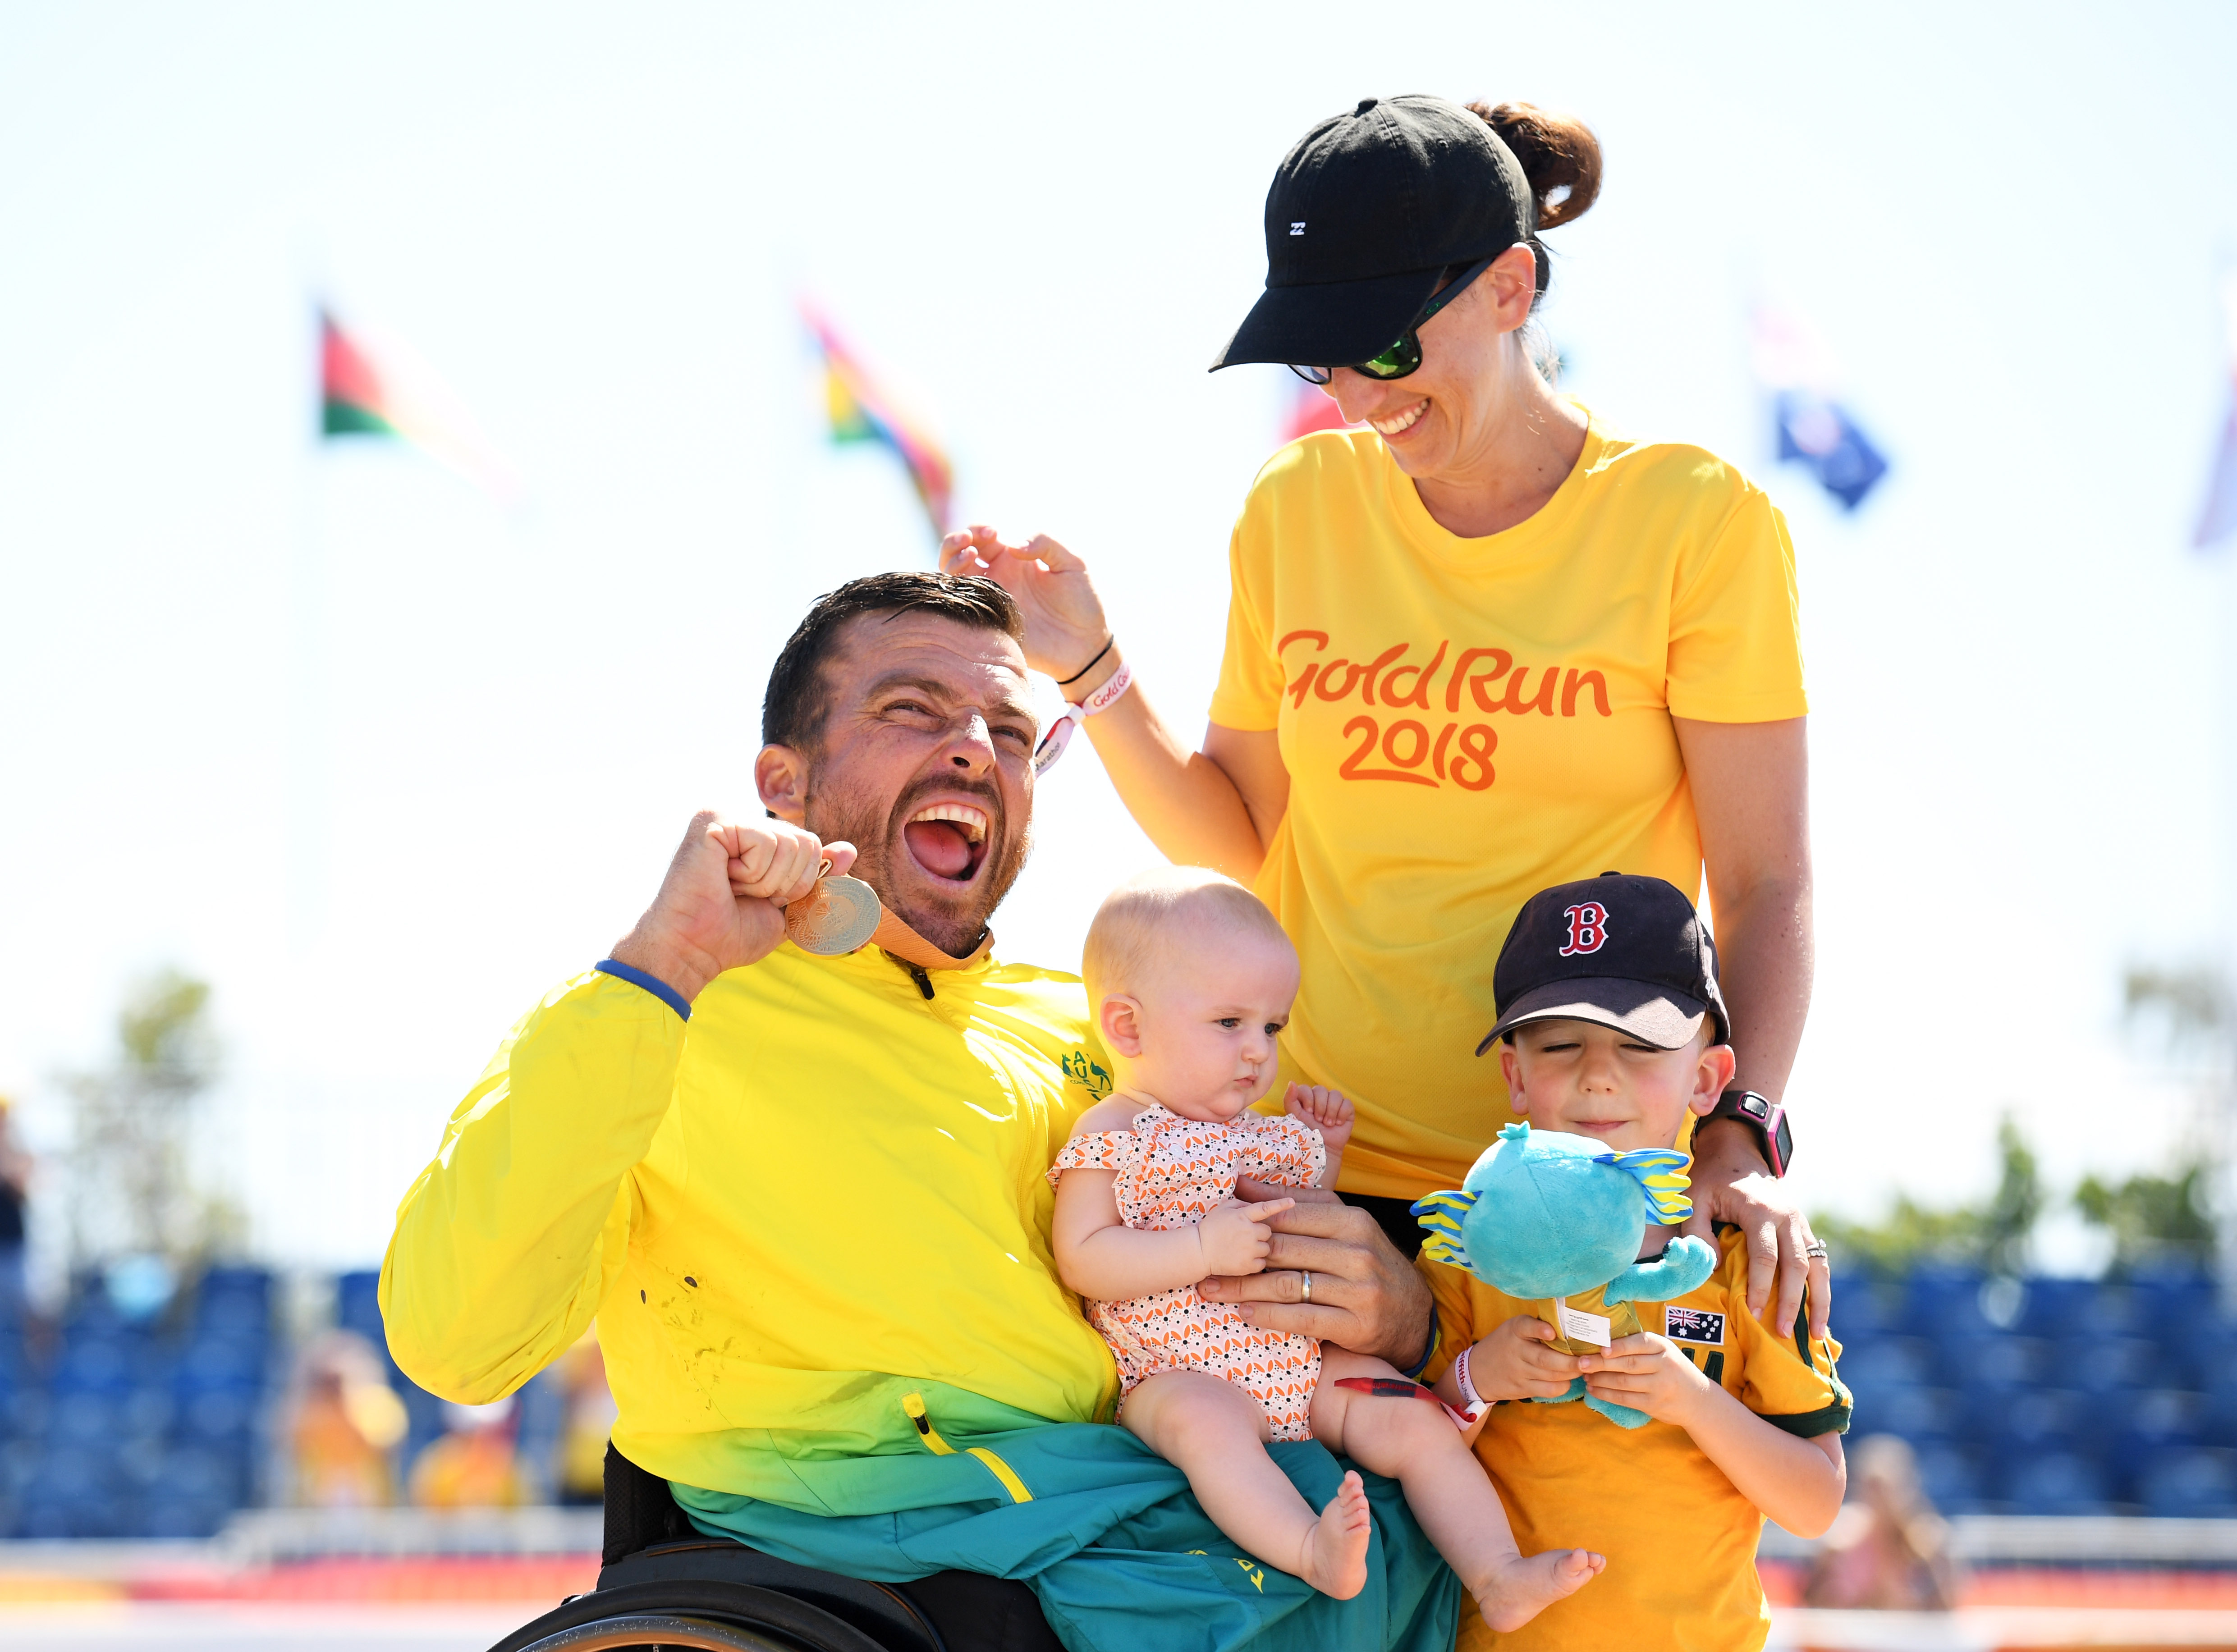 male wheelchair racer Kurt Fearnley holds up his medal alongside his wife and holding his child on his lap